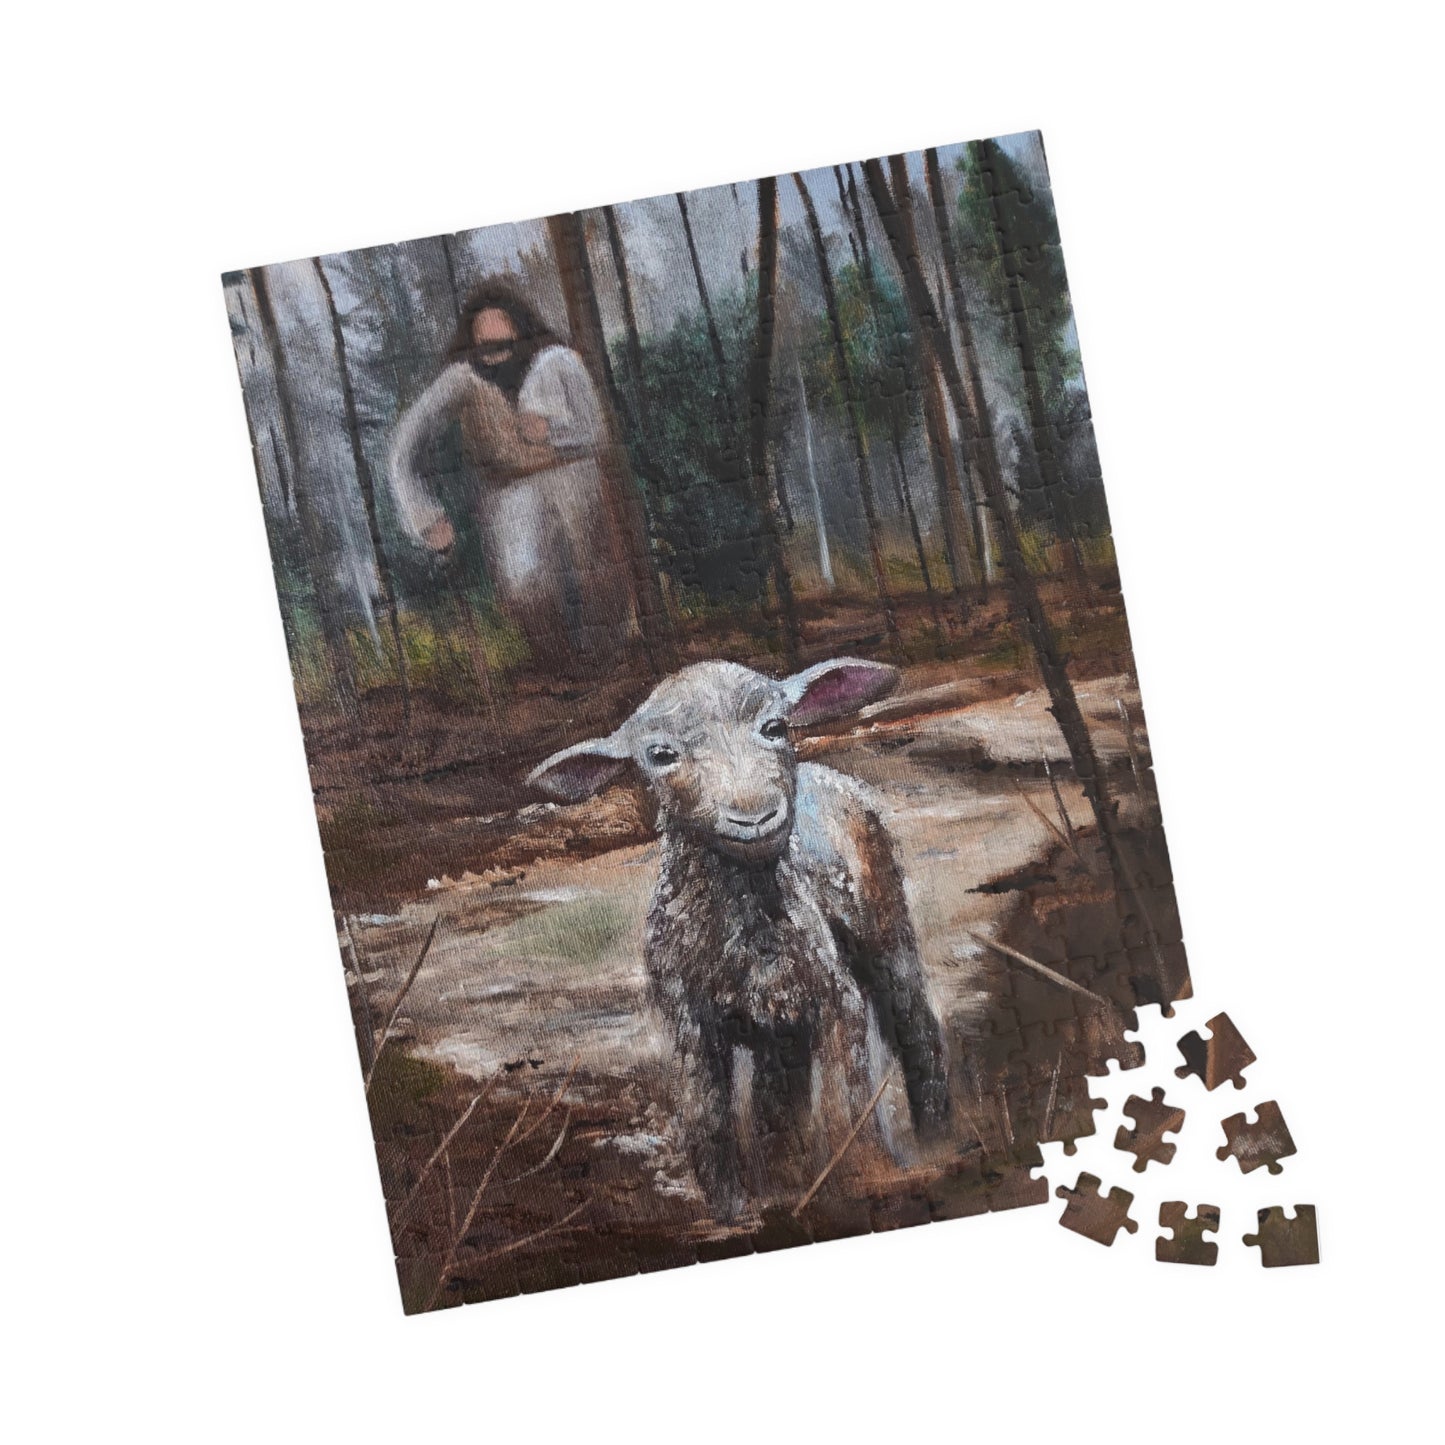 Coming After Me Puzzle 252 Piece